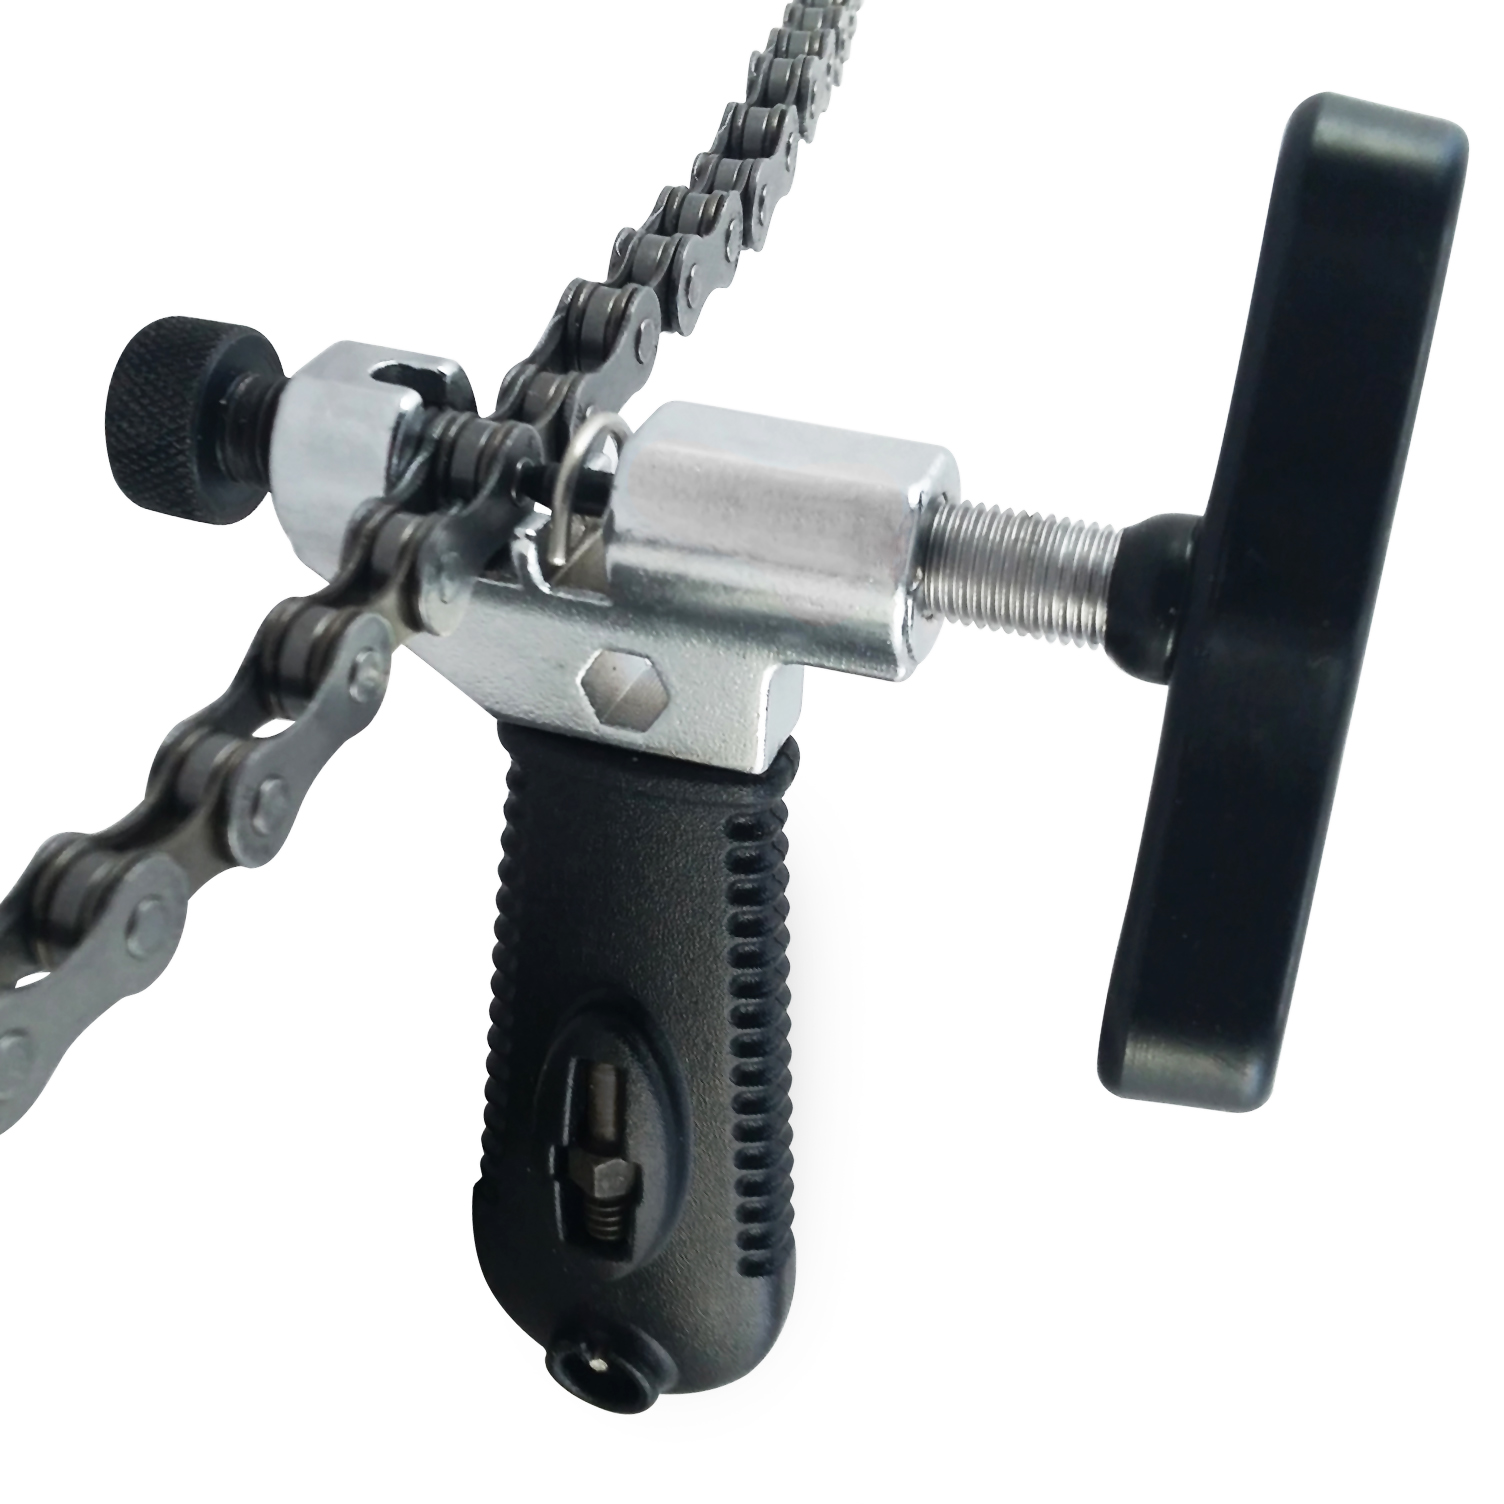 Mini Bicycle Chain Breaker Splitter Cycling Repair Tool Fit for  8/9/10 speed 